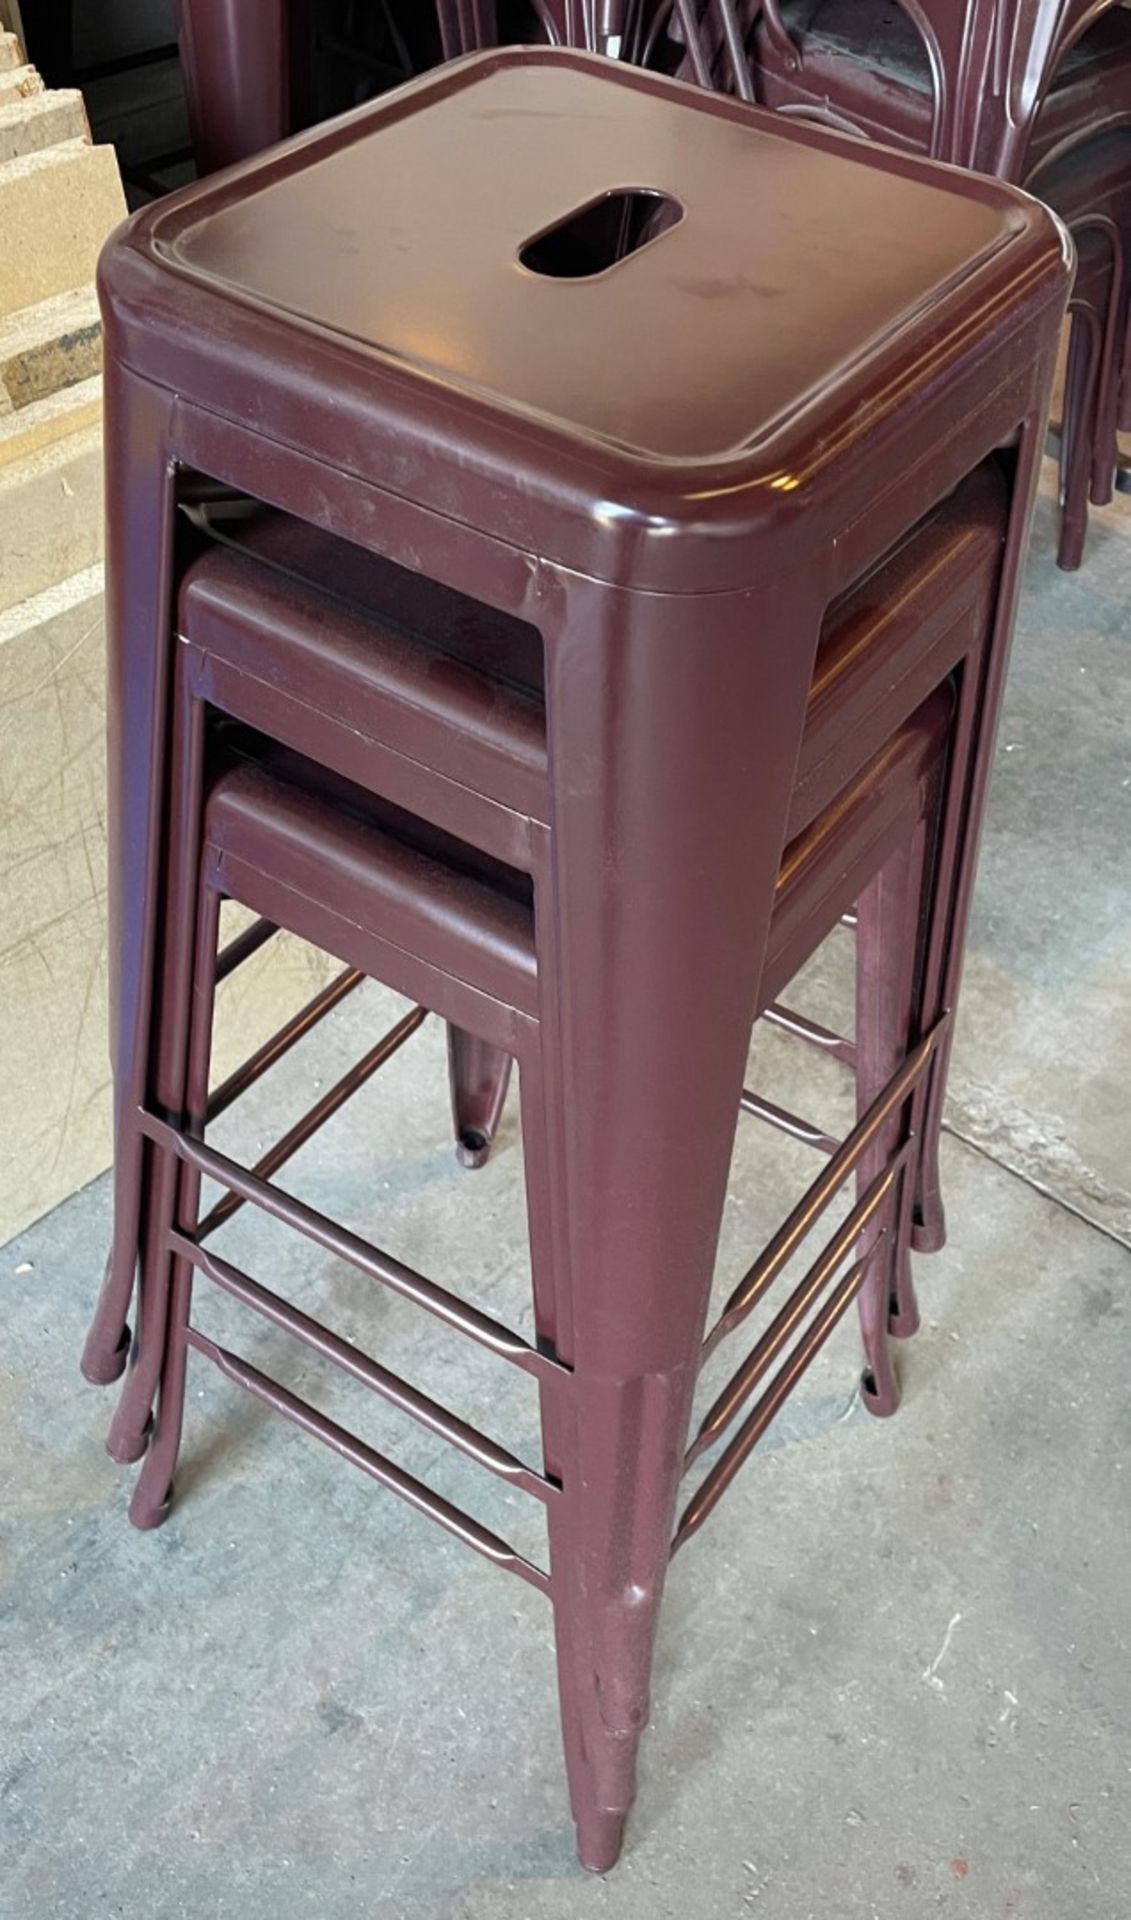 3 x Metal Bar Stools - Ref: FGN066 - CL834 - Location: Essex, RM19This lot was recently removed from - Image 3 of 4